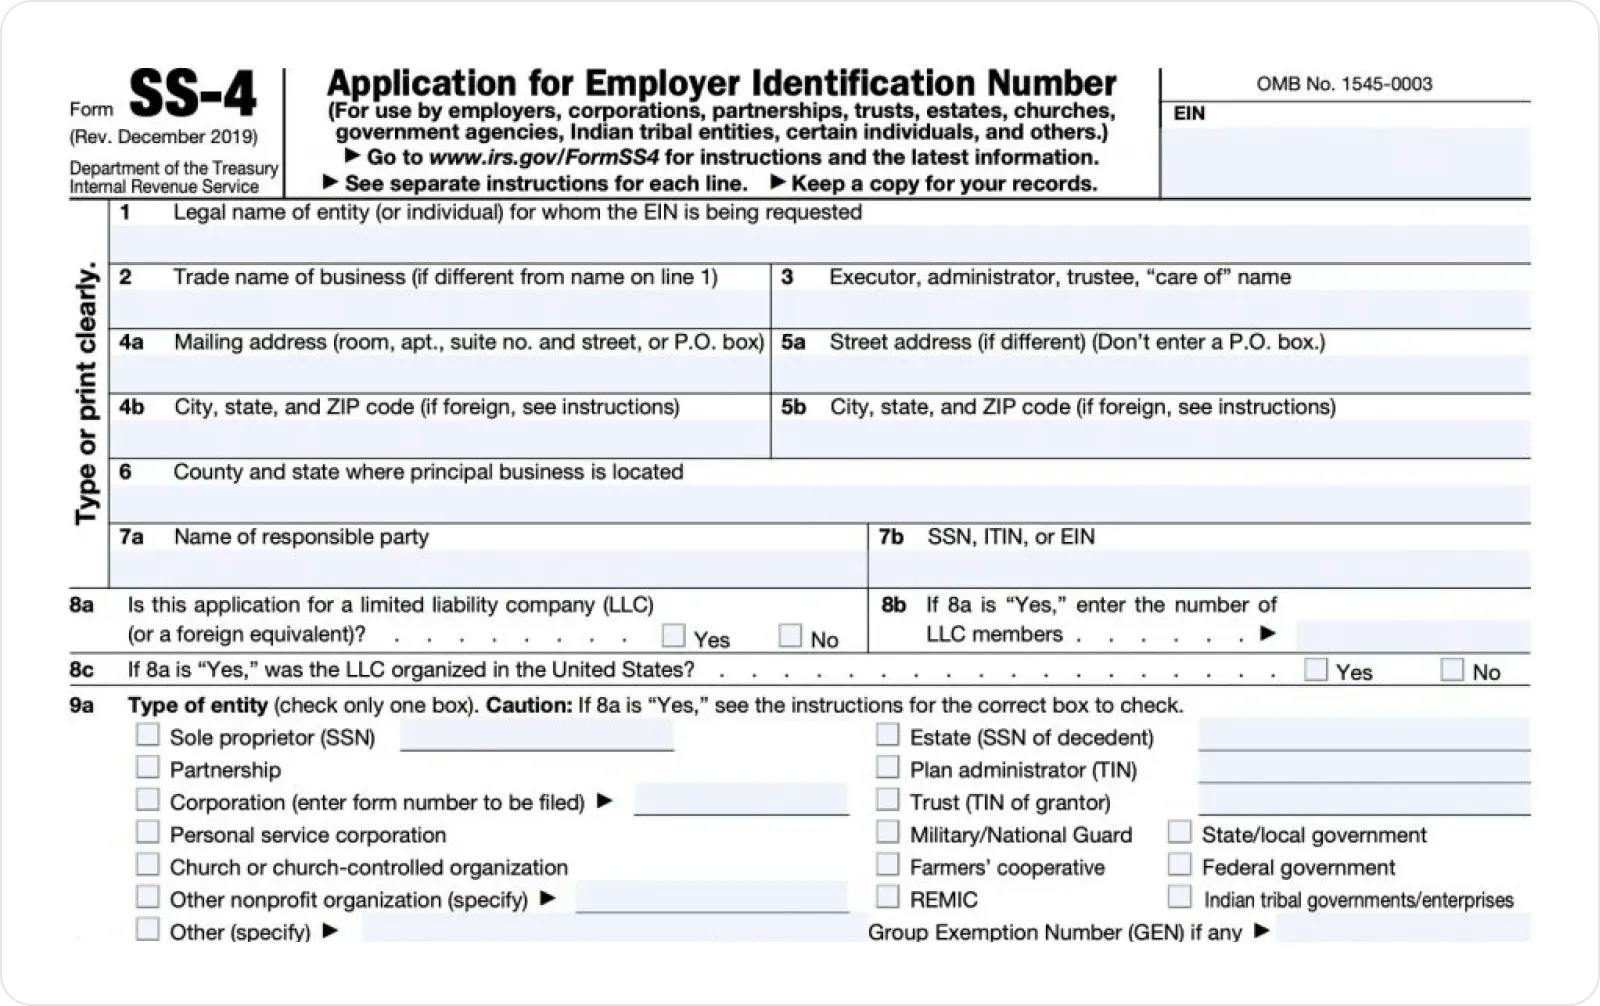 SS-4 Application for Employer Identification Number form